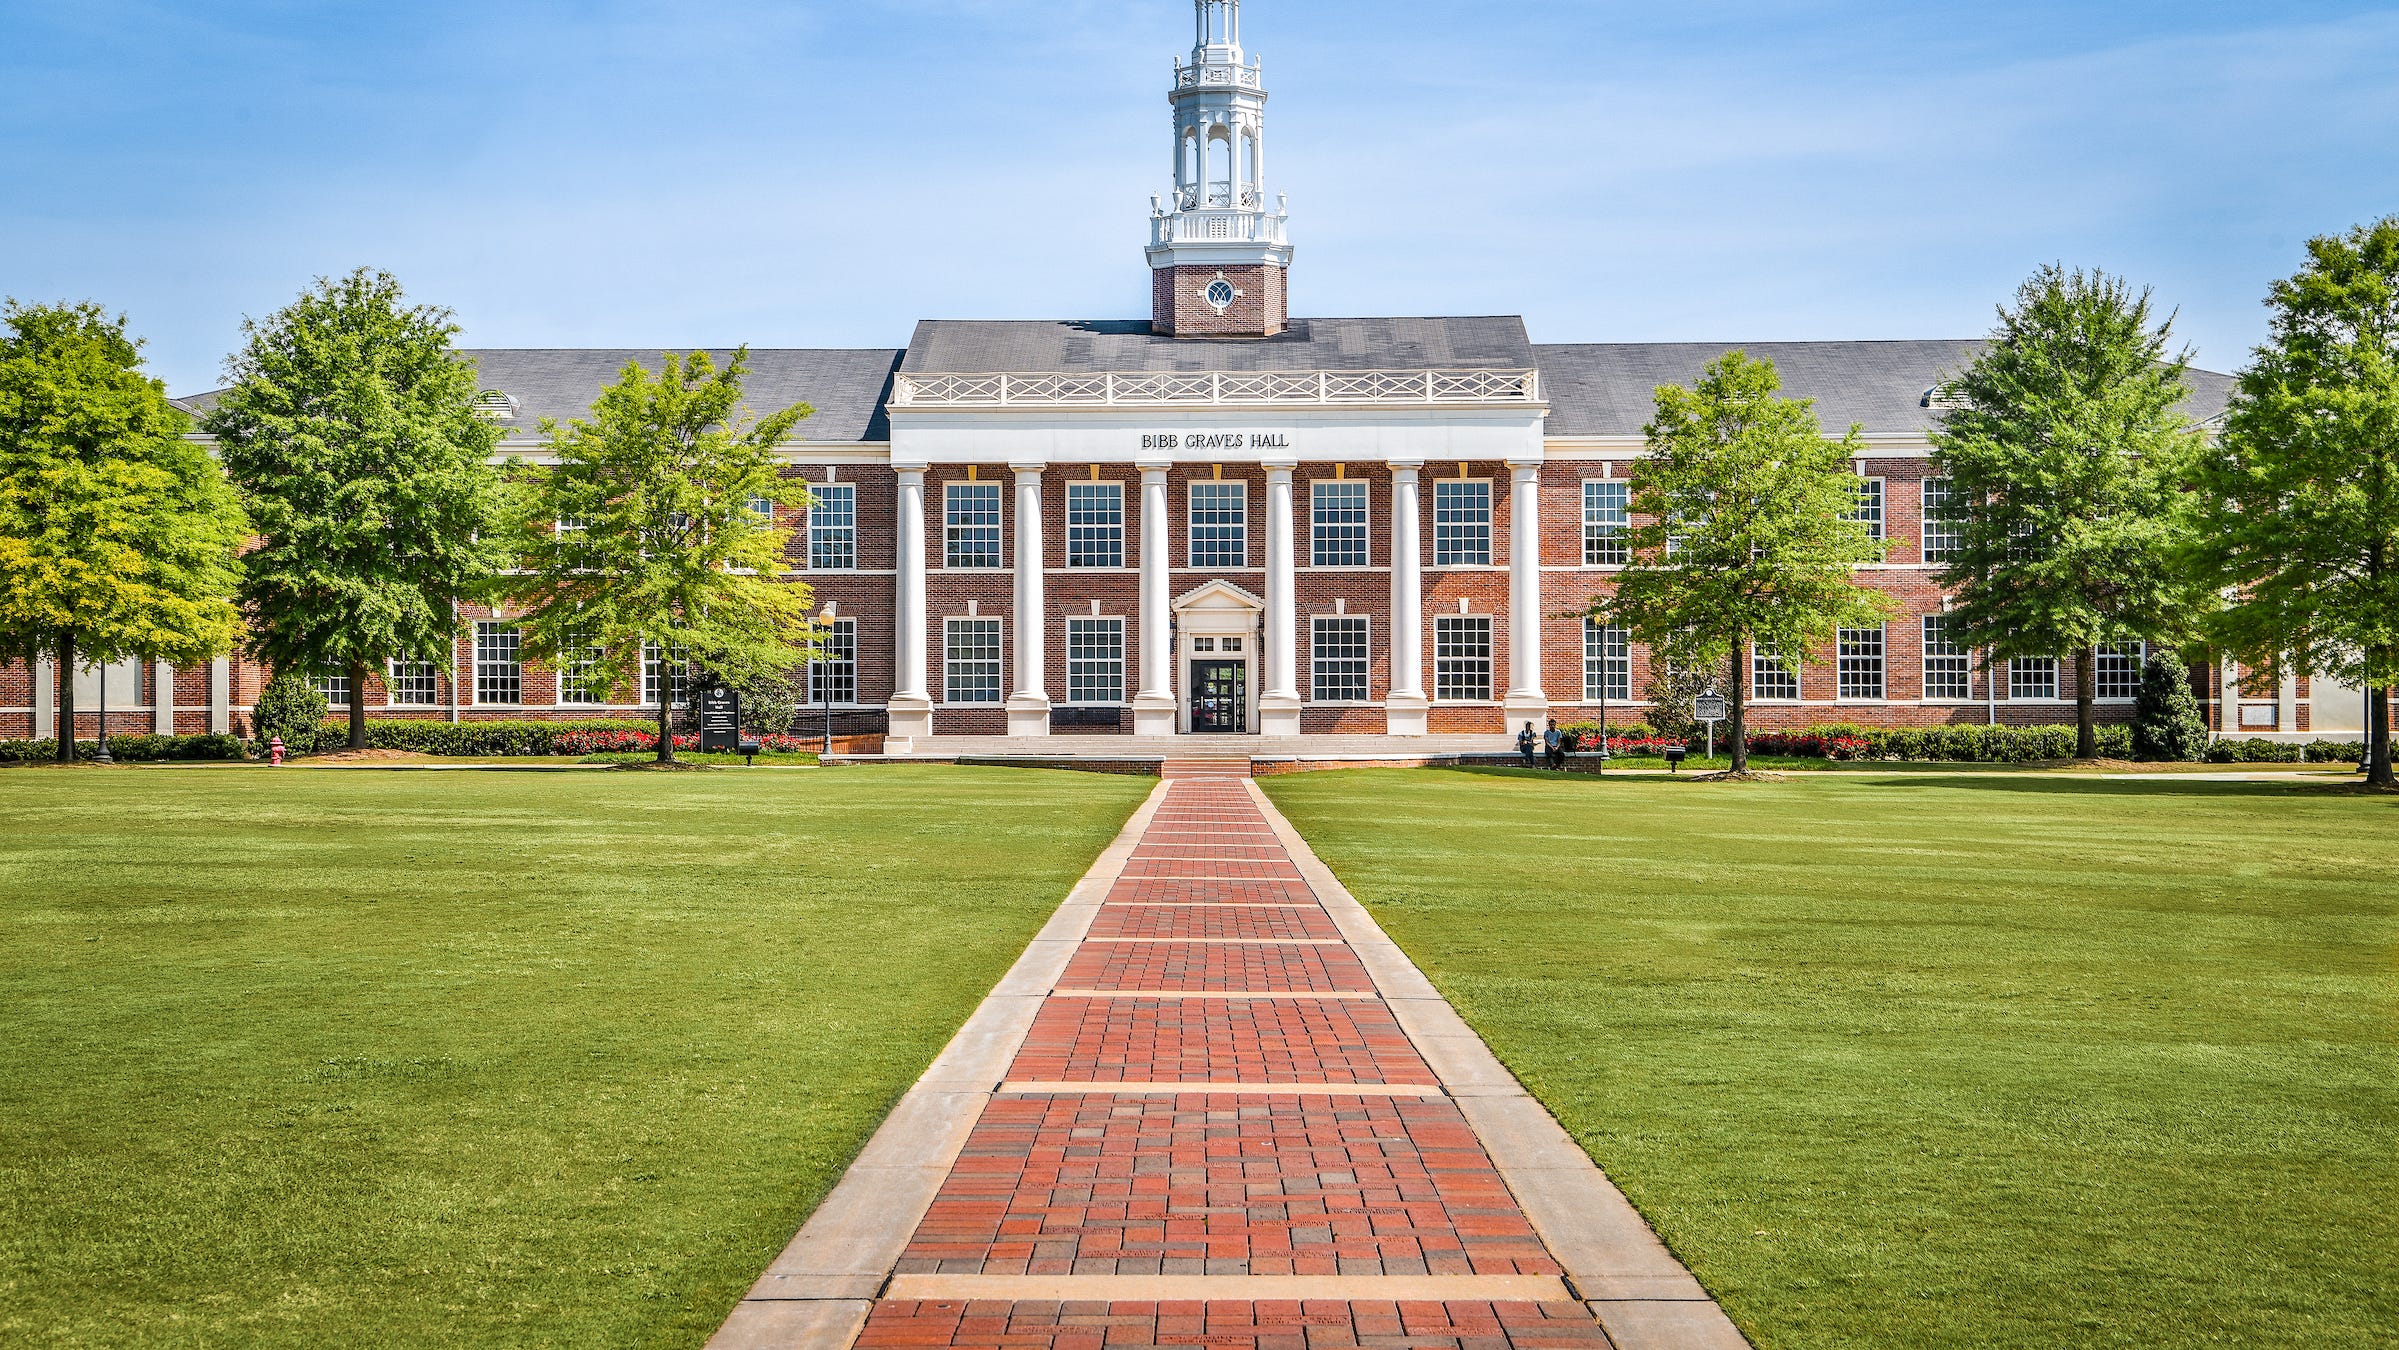 While Auburn hides behind law, Troy University takes